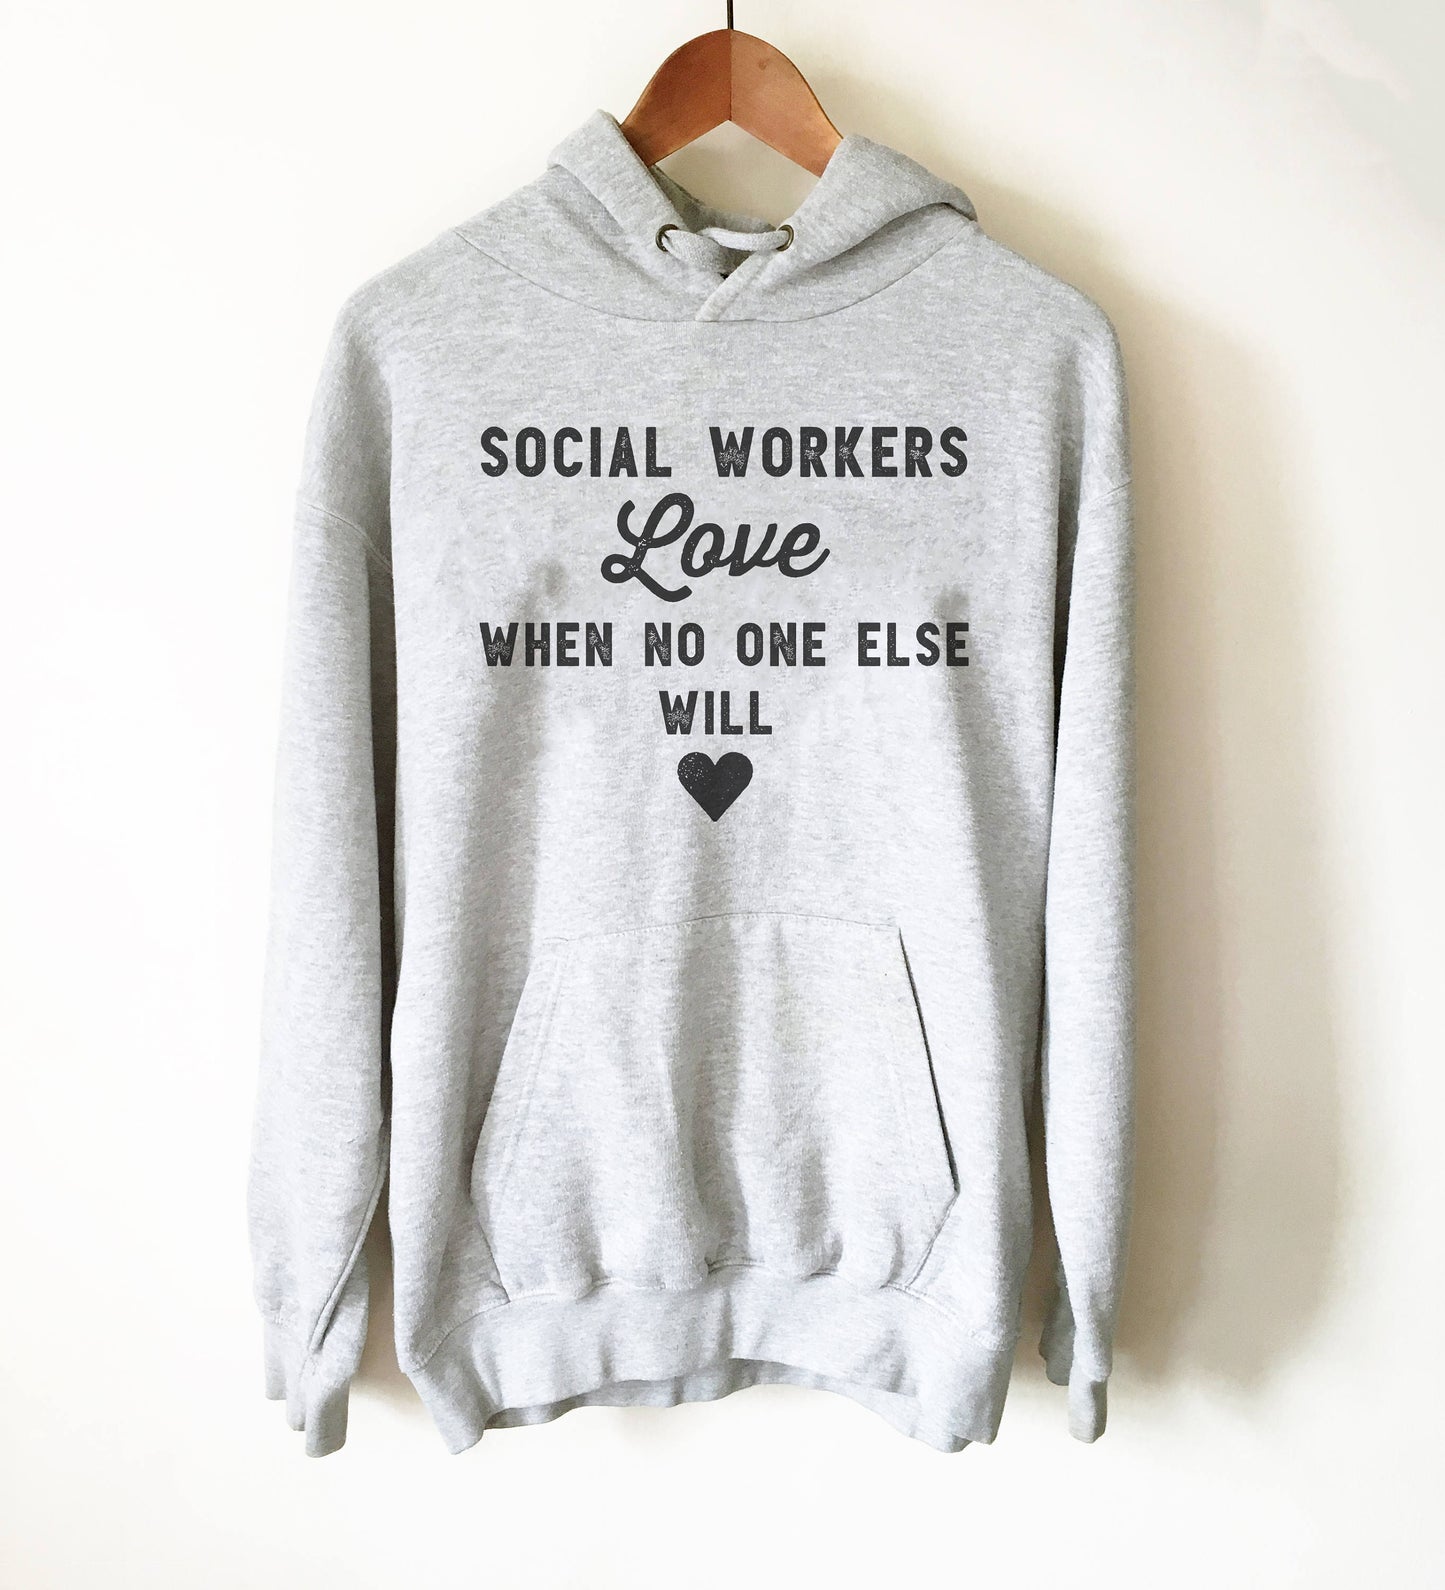 Social Workers Love When No One Else Will Hoodie - Social Worker Shirt, Social Work Shirt, Coworker Gift, Social Worker Gift, Social Worker